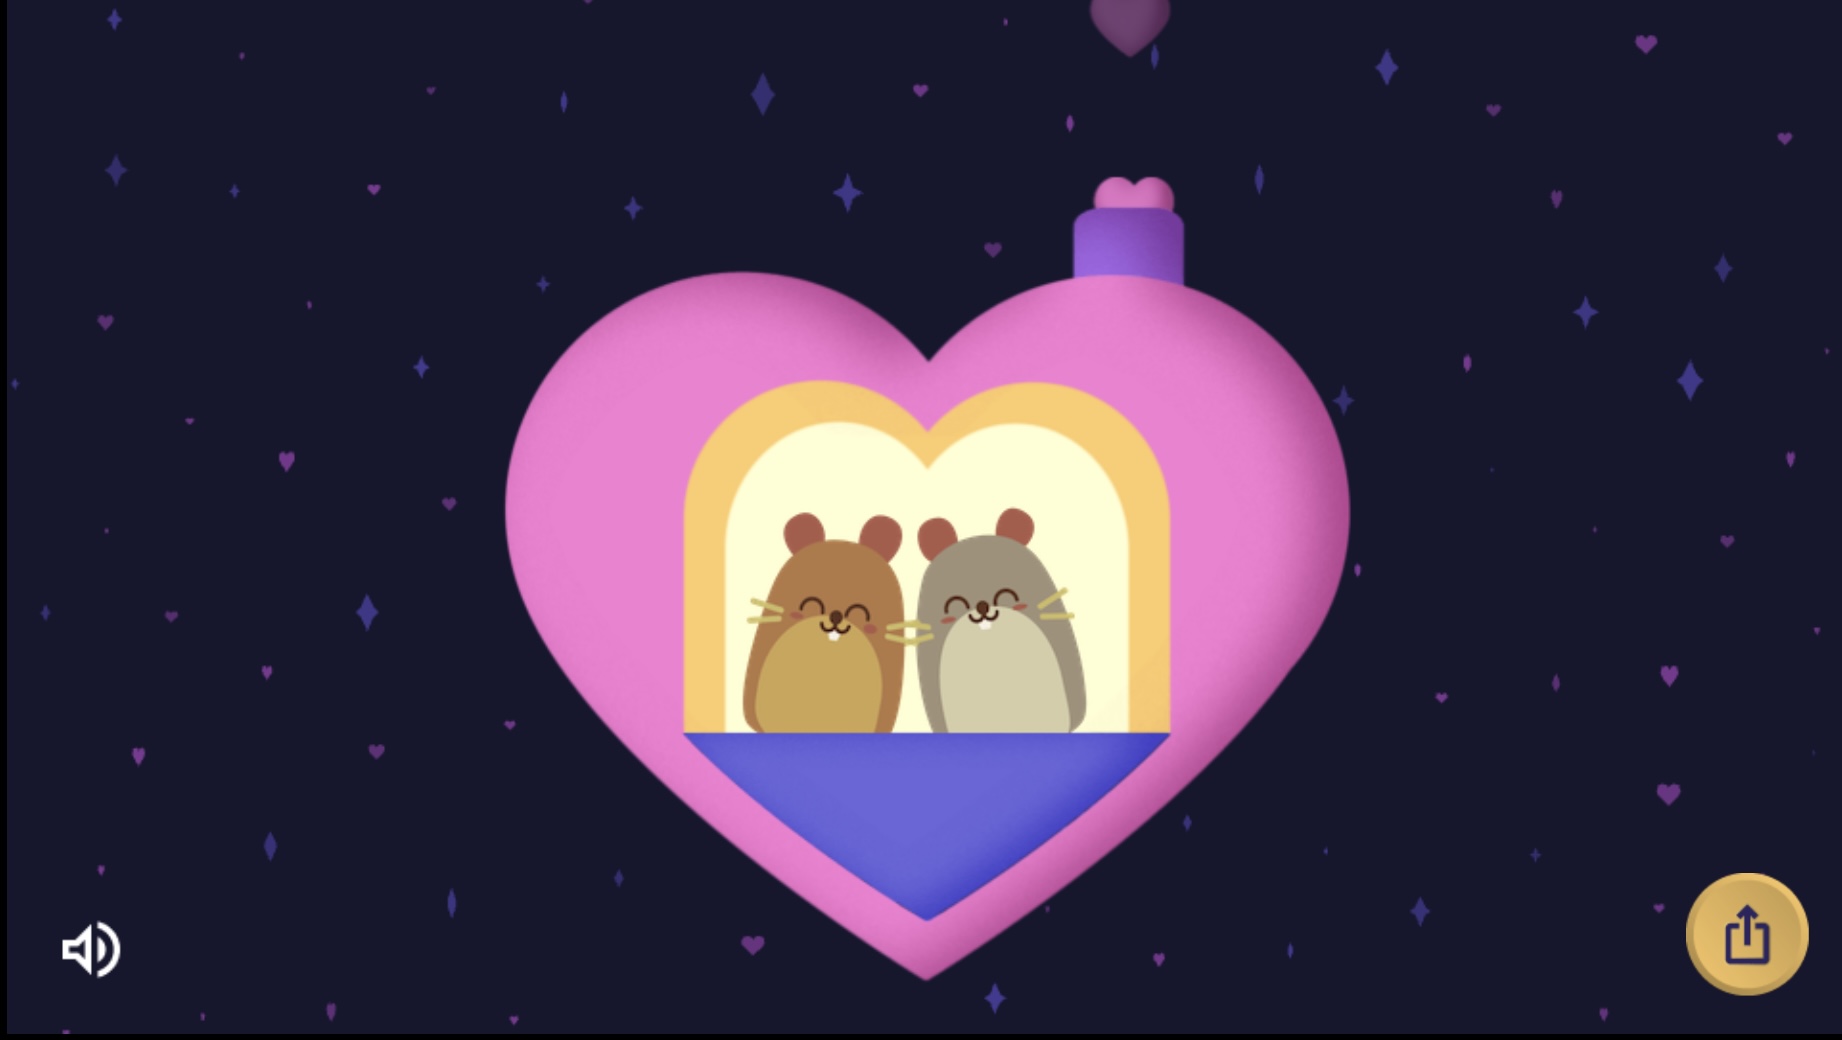 Google Celebrates Valentine's Day With New Doodle Game